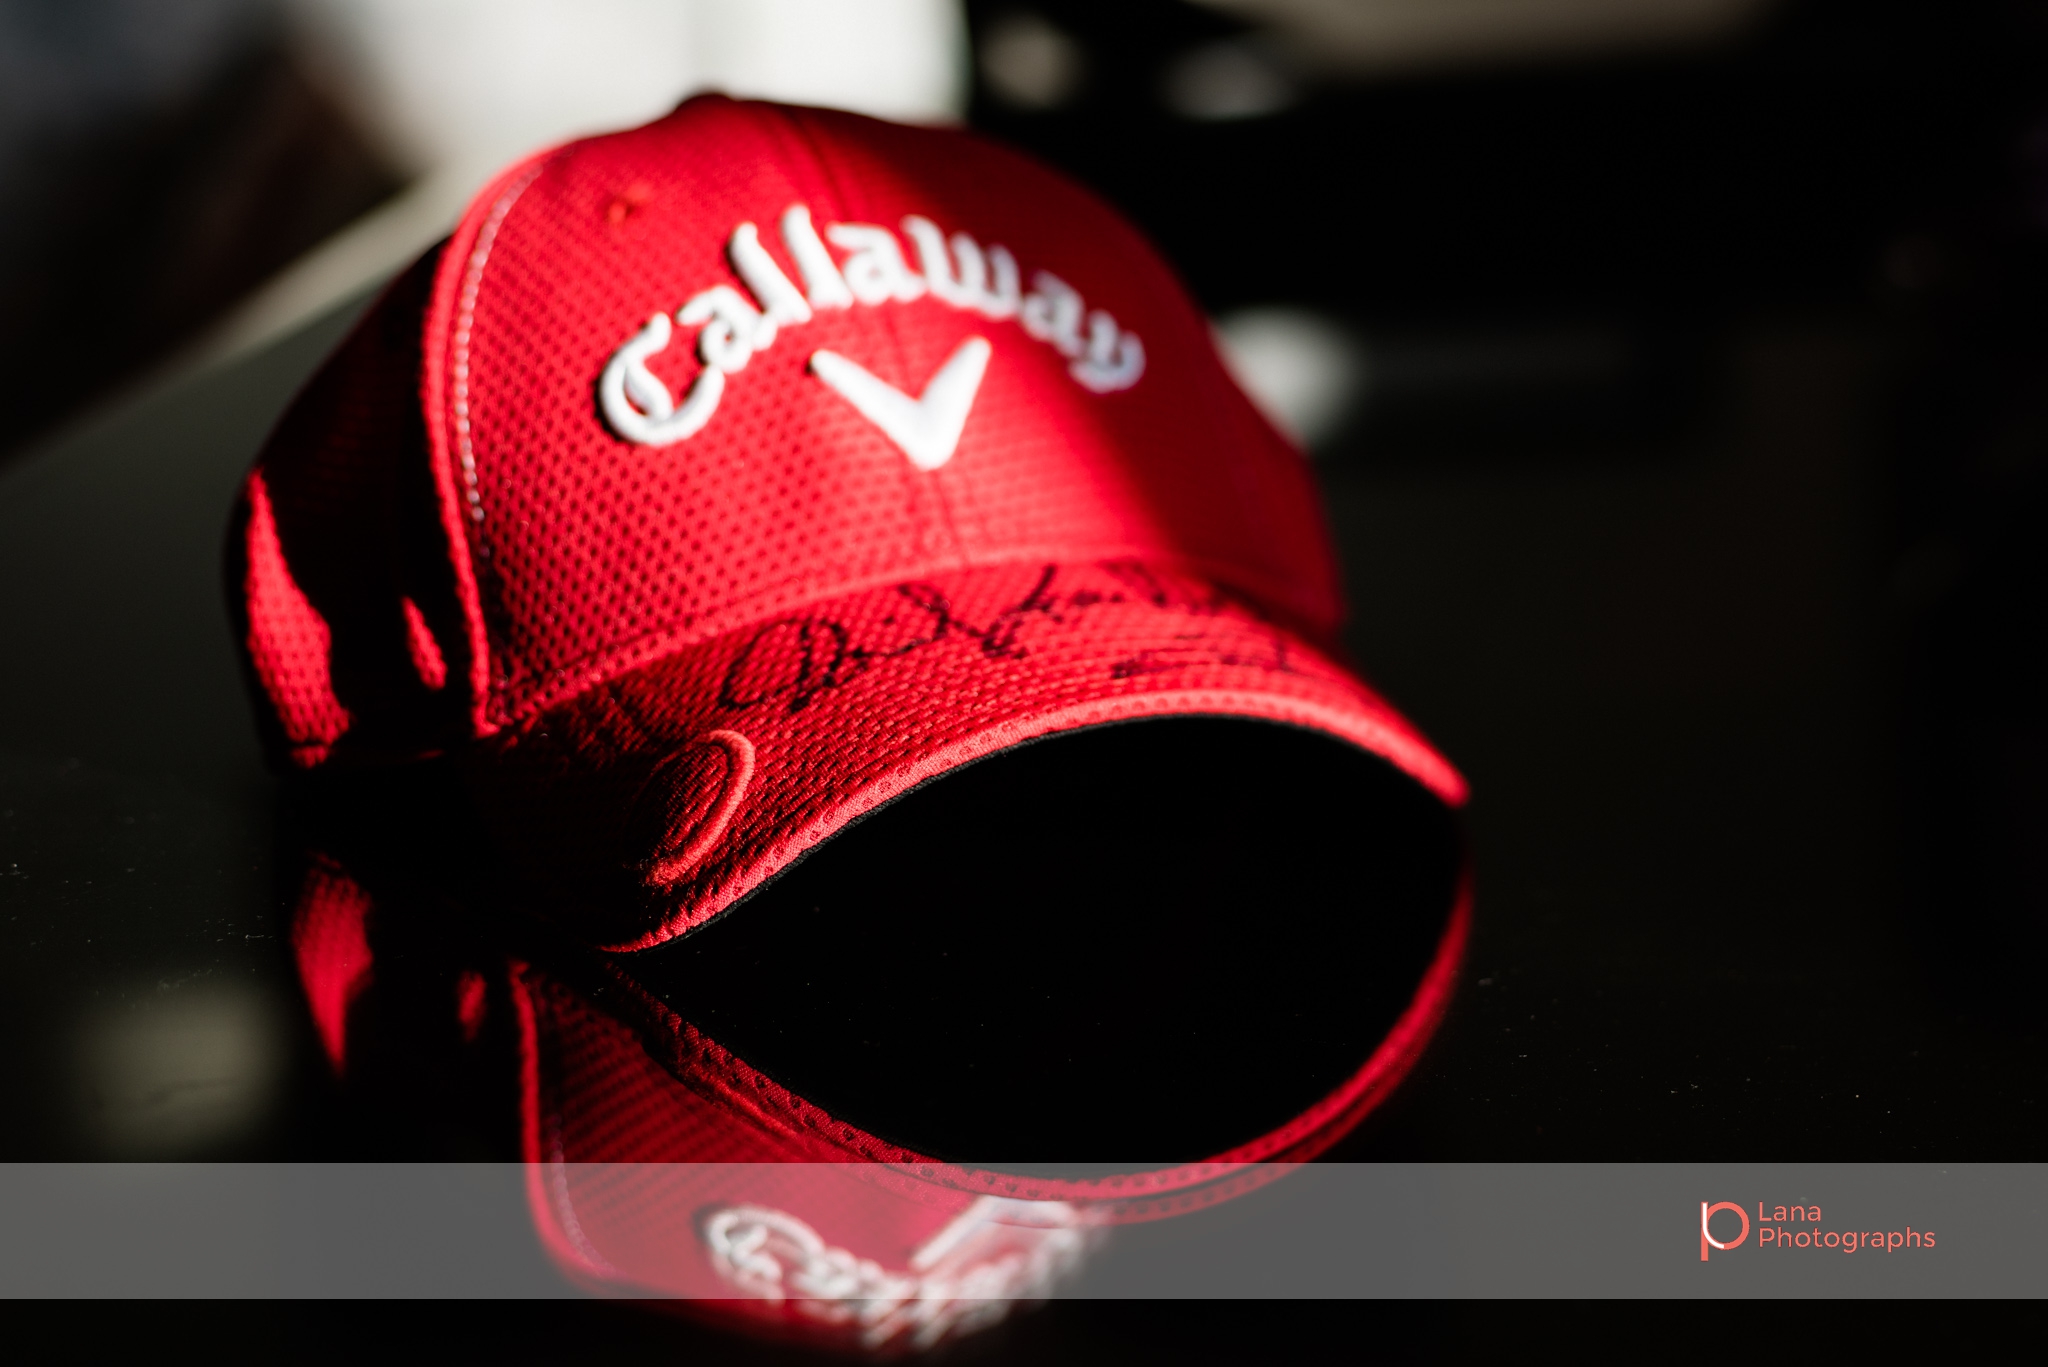  A golf cap signed by David Leadbetter from when he visited Dubai in January 2017 